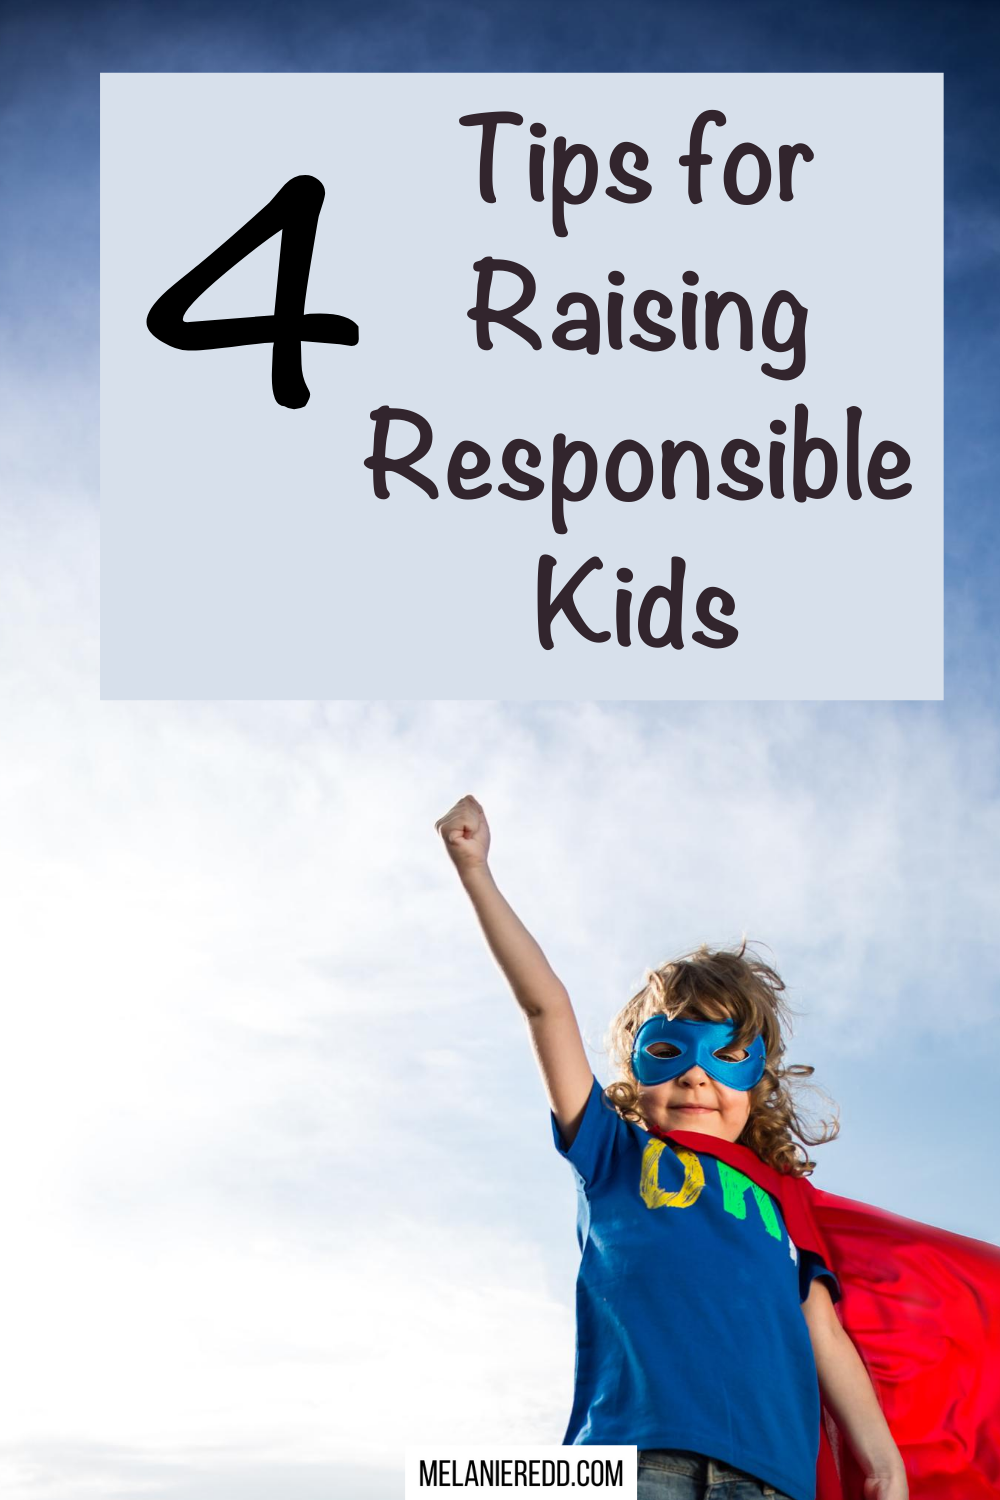 Teaching our children to work hard and act responsibly can be a real challenge! Here are 4 Tips for Raising Responsible Kids.